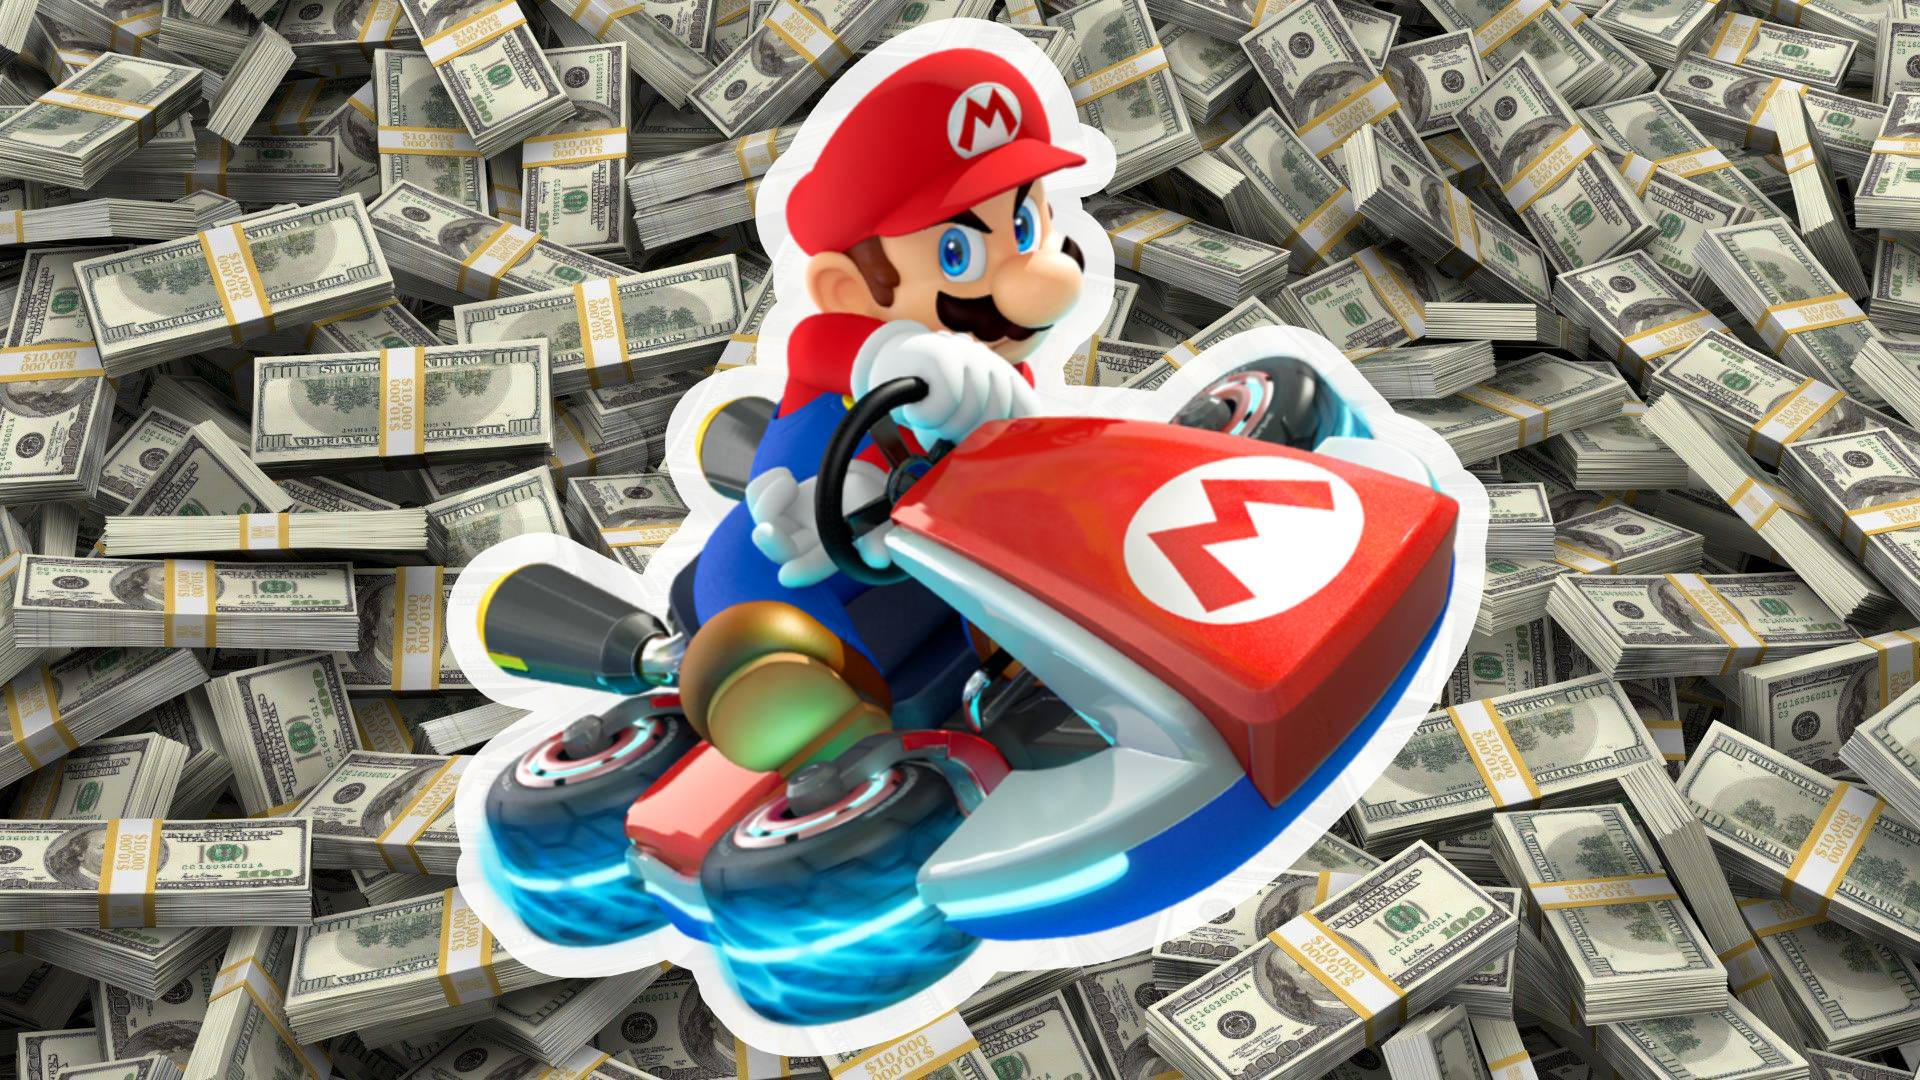 Mario Kart 8 Deluxe Is Now Officially The Best Selling Entry In The Series thumbnail